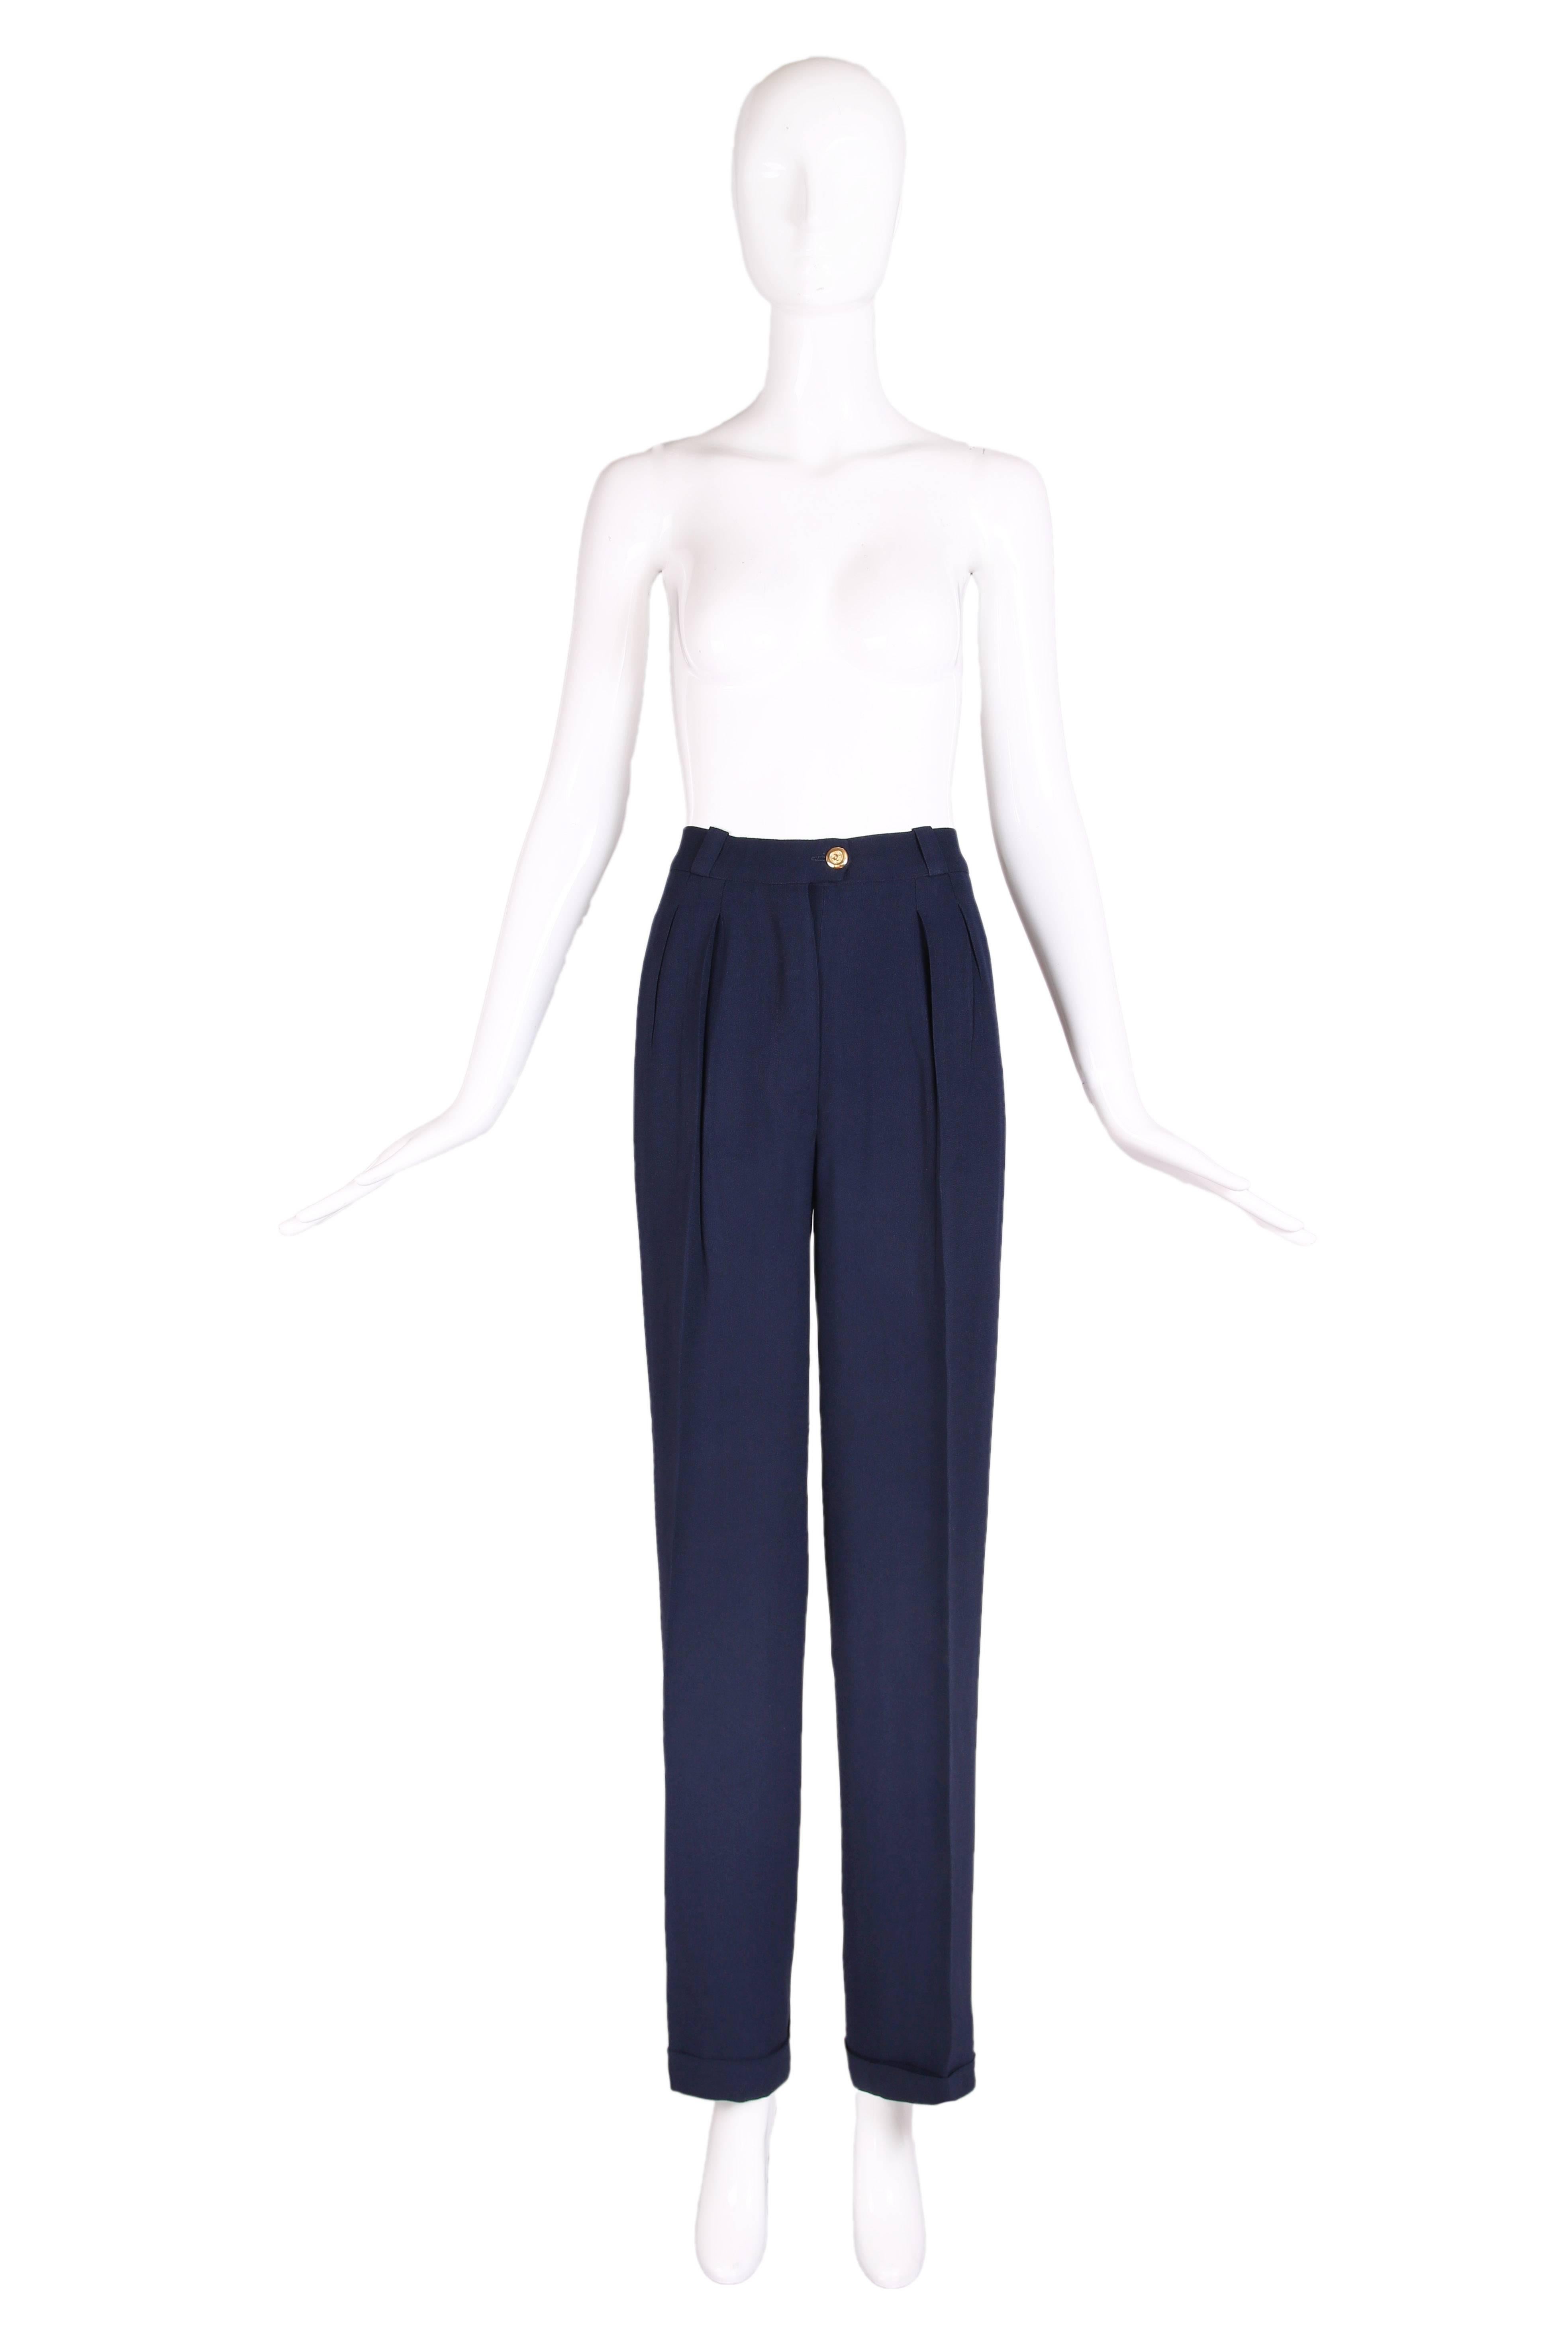 Chanel navy rayon blend crepe high-waist trousers with button fly closer and 1.5